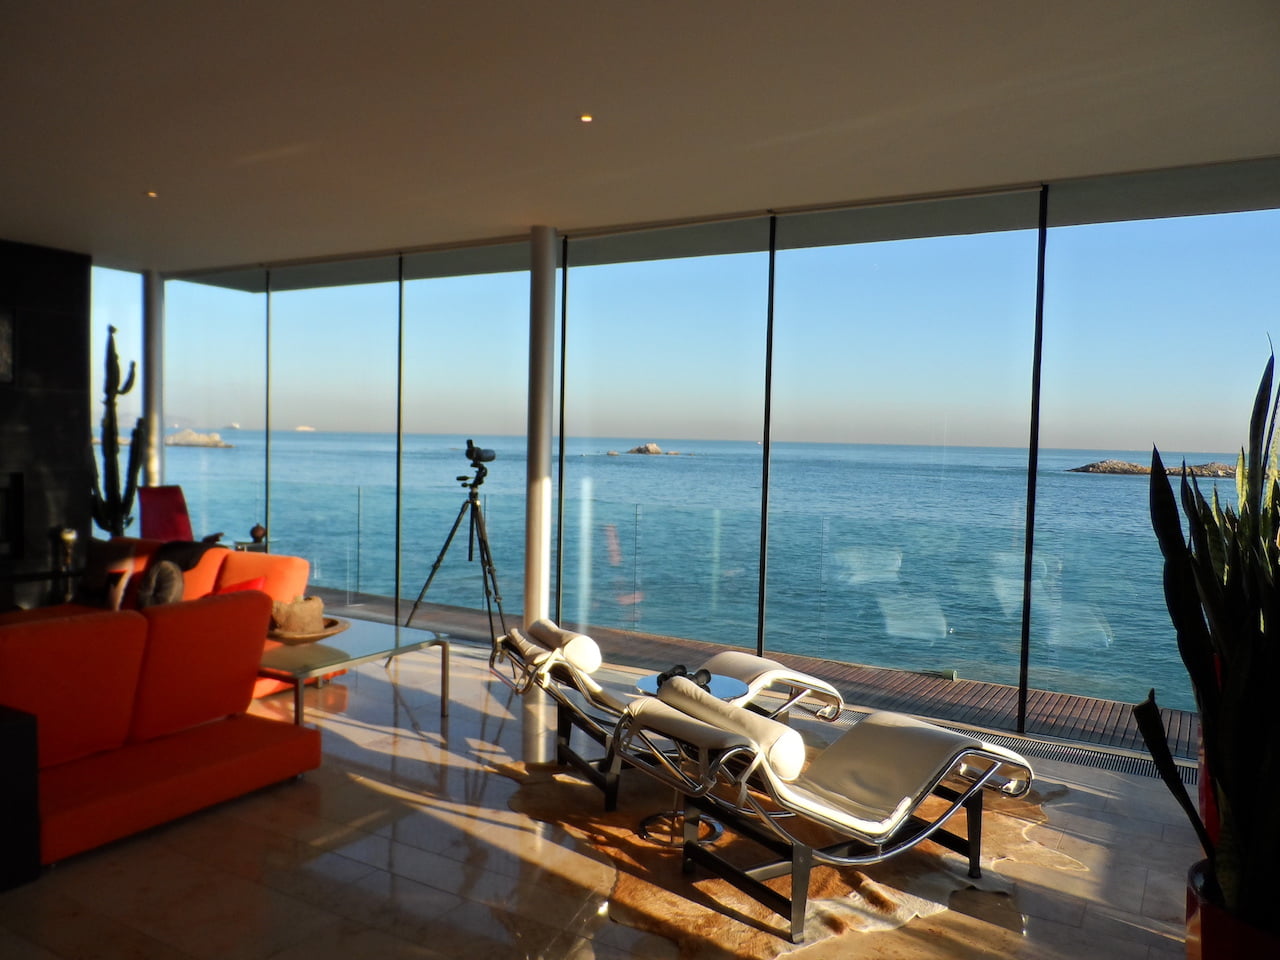 ENQUIRIES – Exceptional Sea Side Property – 4 Double Bedrooms/5 Bathrooms – Co. Dublin. Ireland